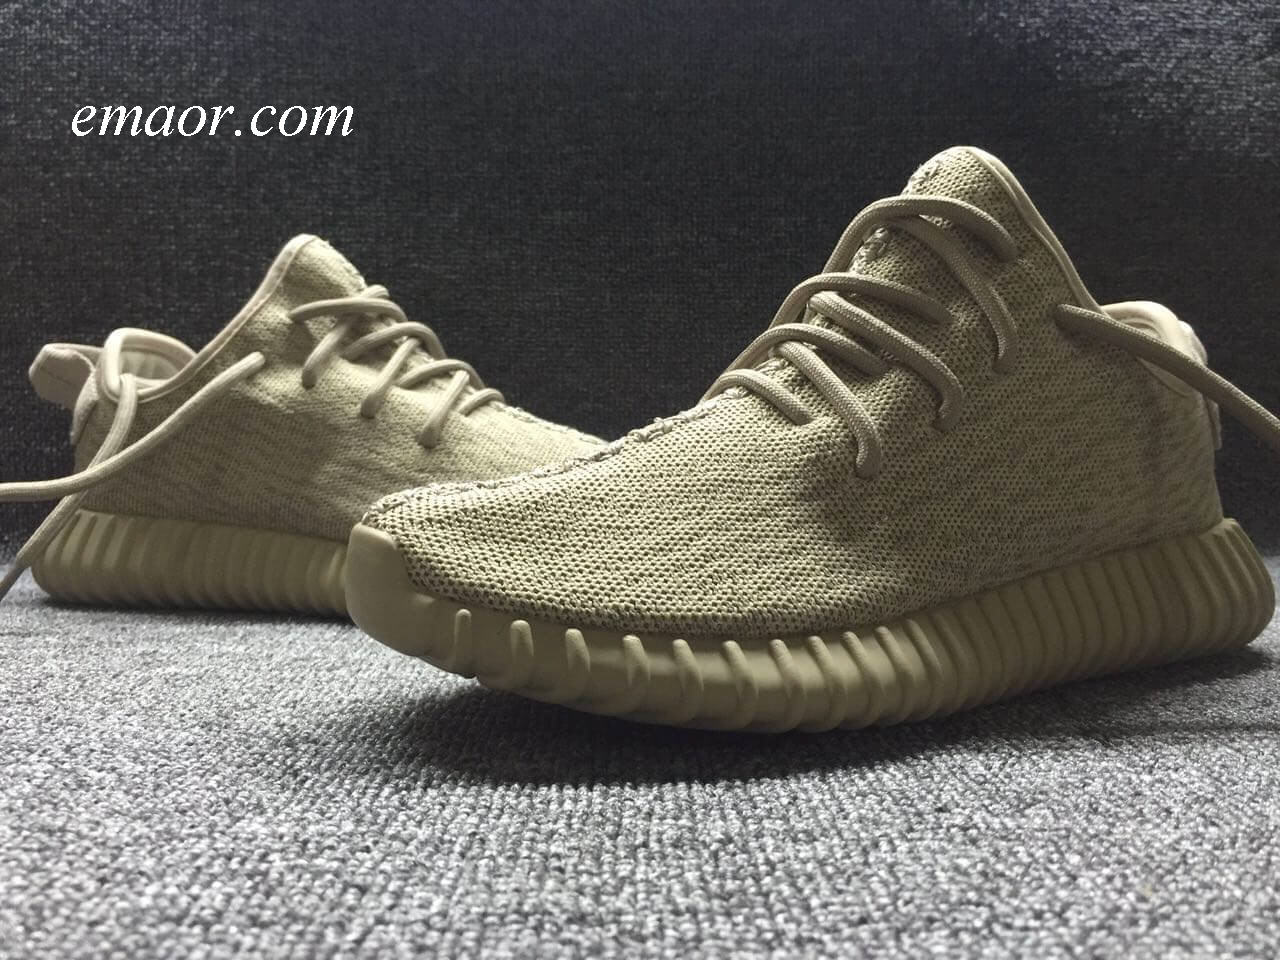 Yezzy Boost 350 V2 Brand Air 350 Weaving Men's Hiking Shoes Yeezys Sport Shoes Breathable Comfortable Athletic Trainer Sneakers Men's Zapatos Yezzy Boost 350 V2